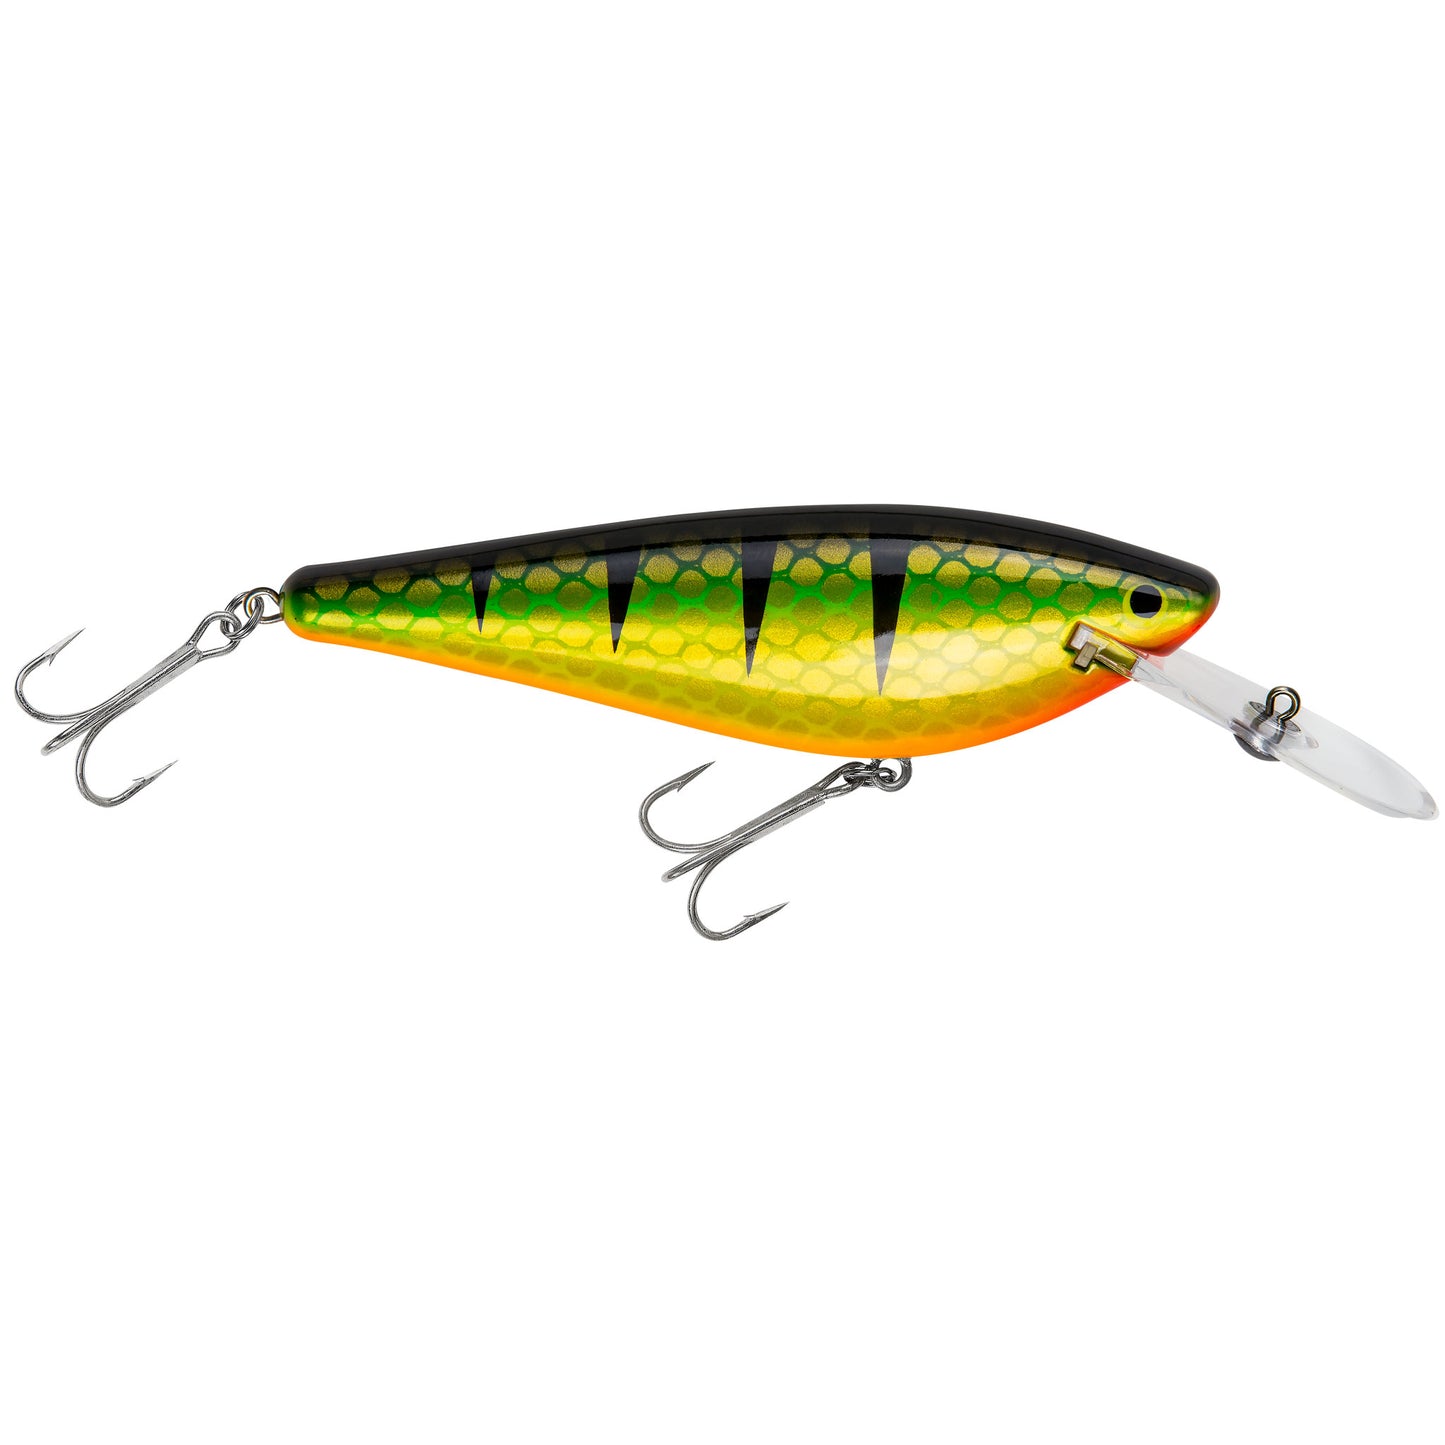 Northland Rumble Monster (Previously Monster Shad)